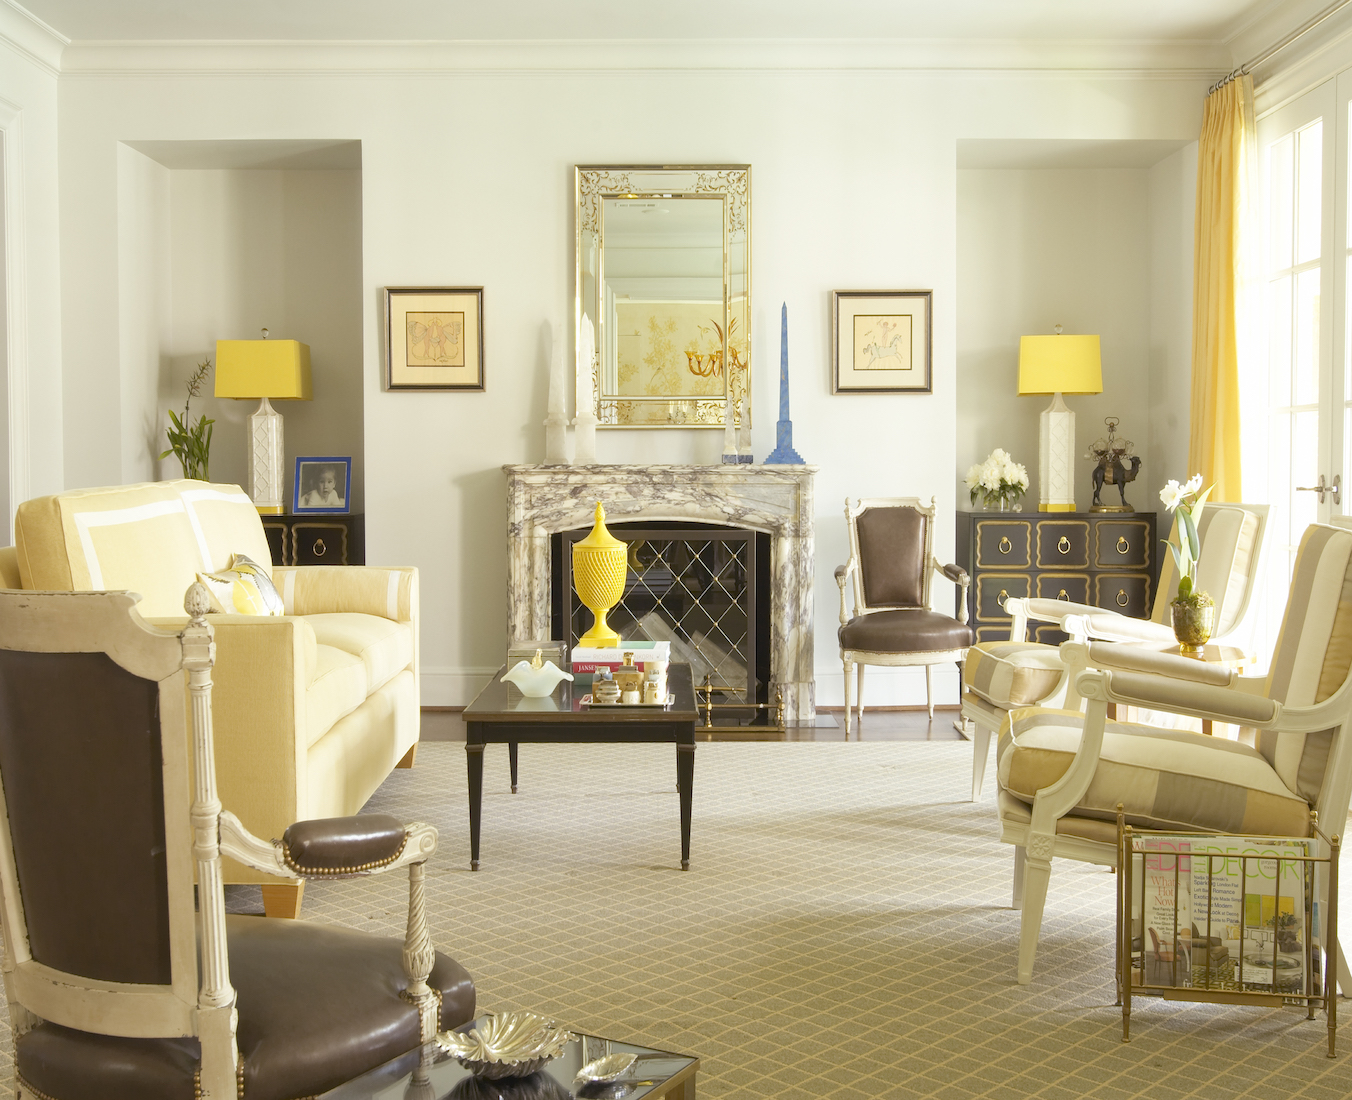 11 Tips for Designing with Yellow - Southern Lady Magazine